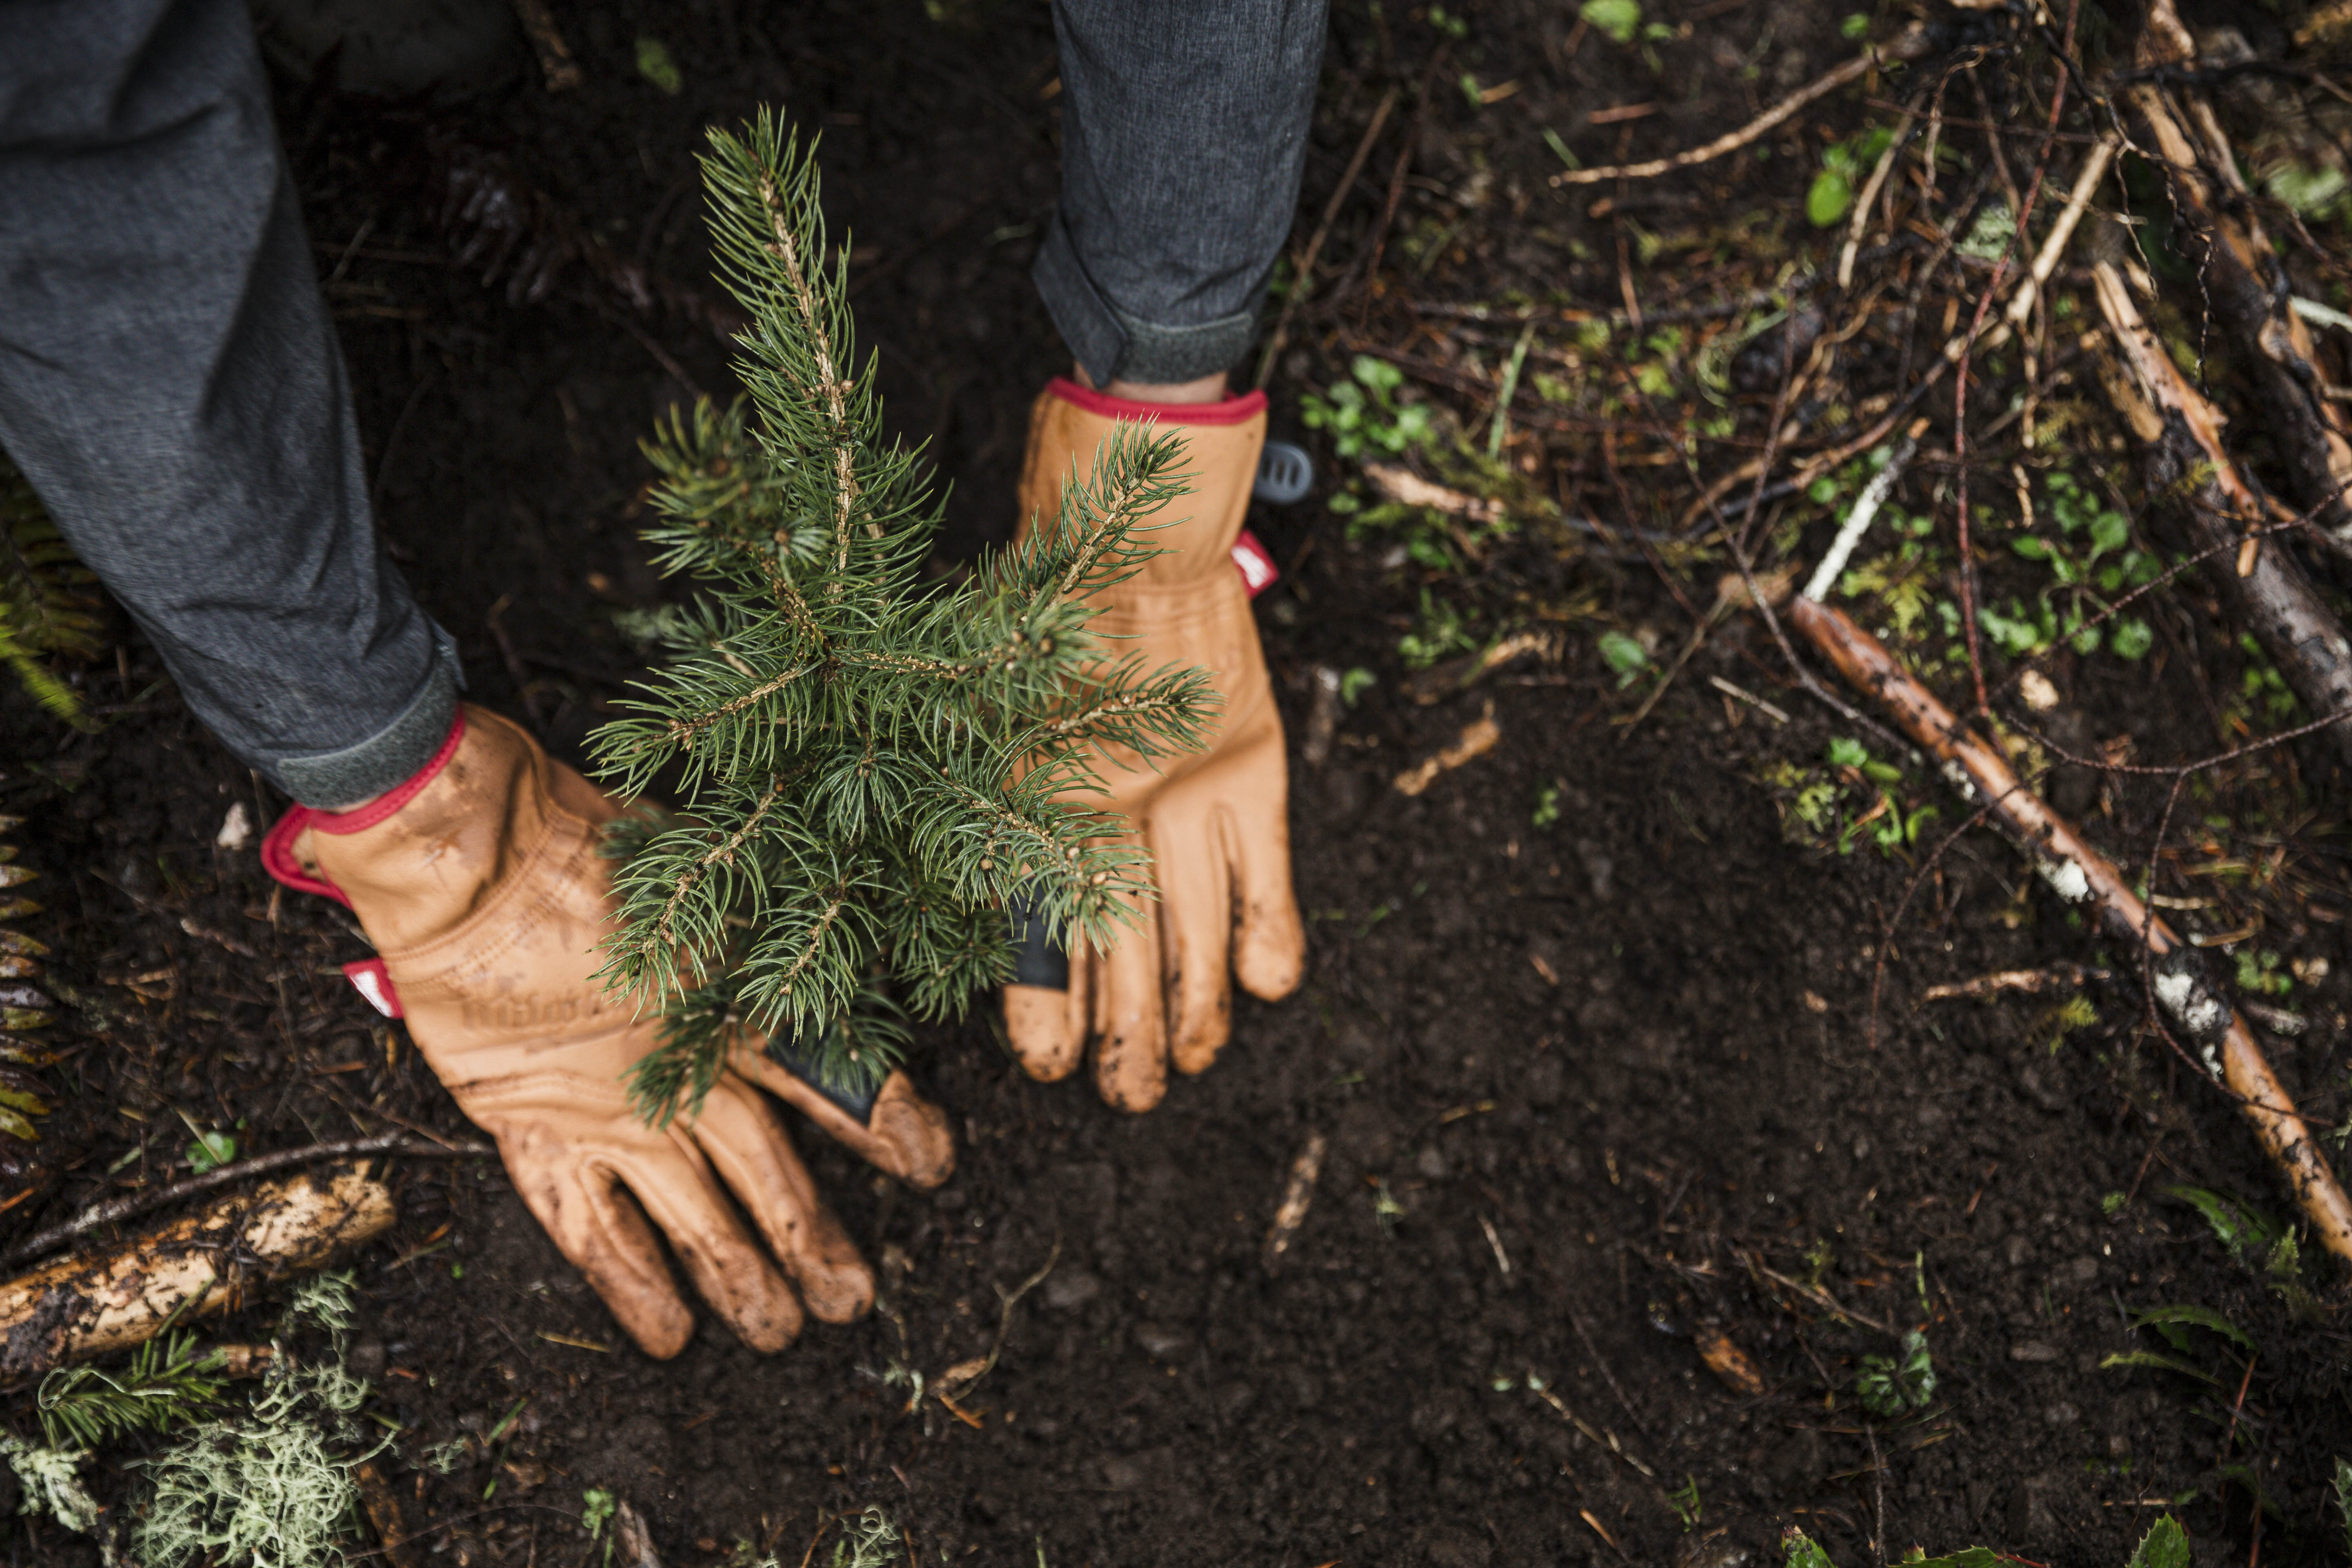 Recognizing that forests are vital to the long-term sustainability of our planet, Clayton and the Arbor Day Foundation have launched an important partnership to plant more than two million native species trees to help restore and revitalize forest ecosystems.